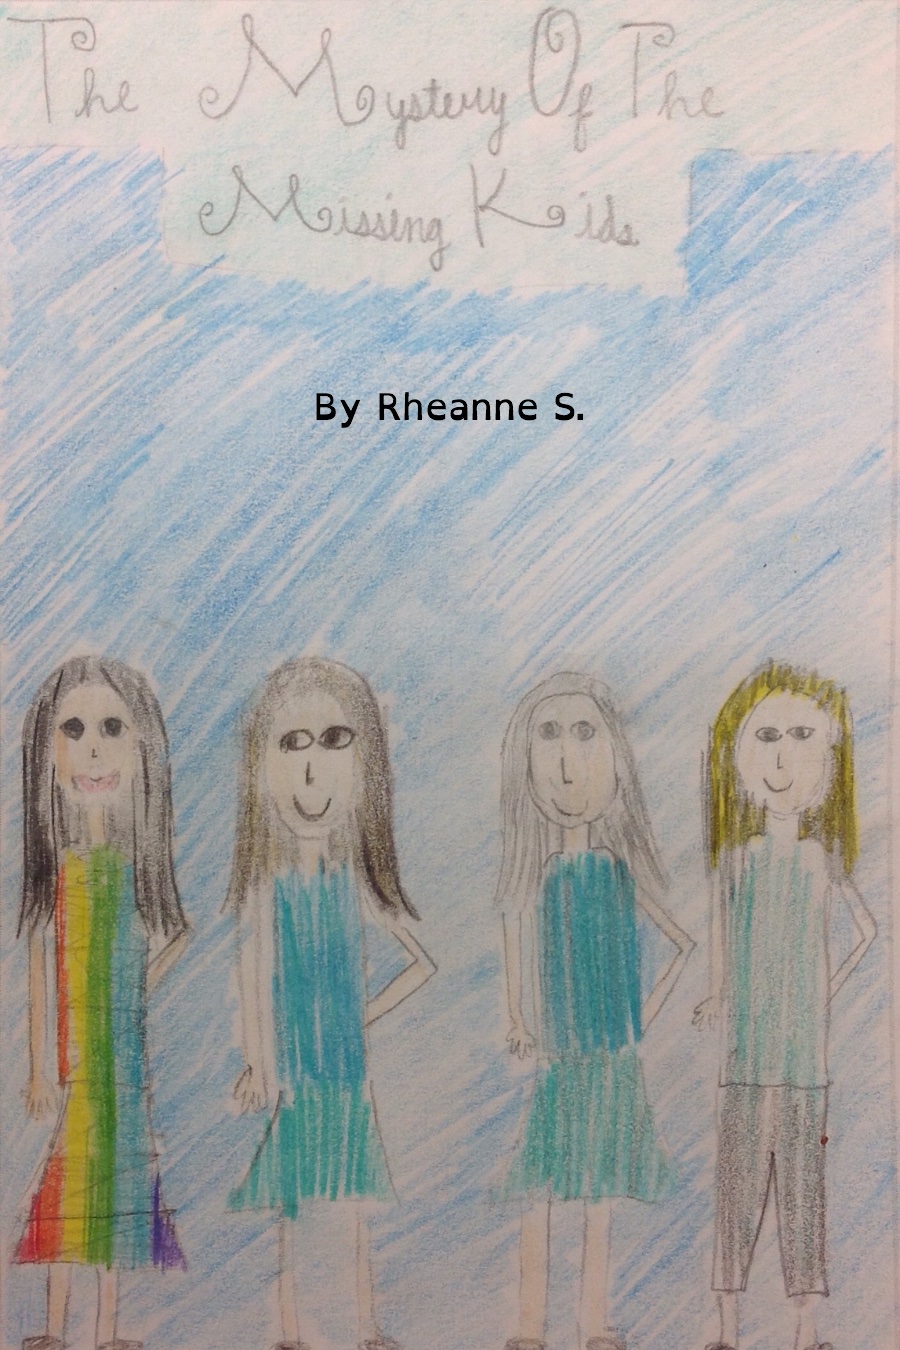 The Mystery of the Missing Kids by Rheanne S